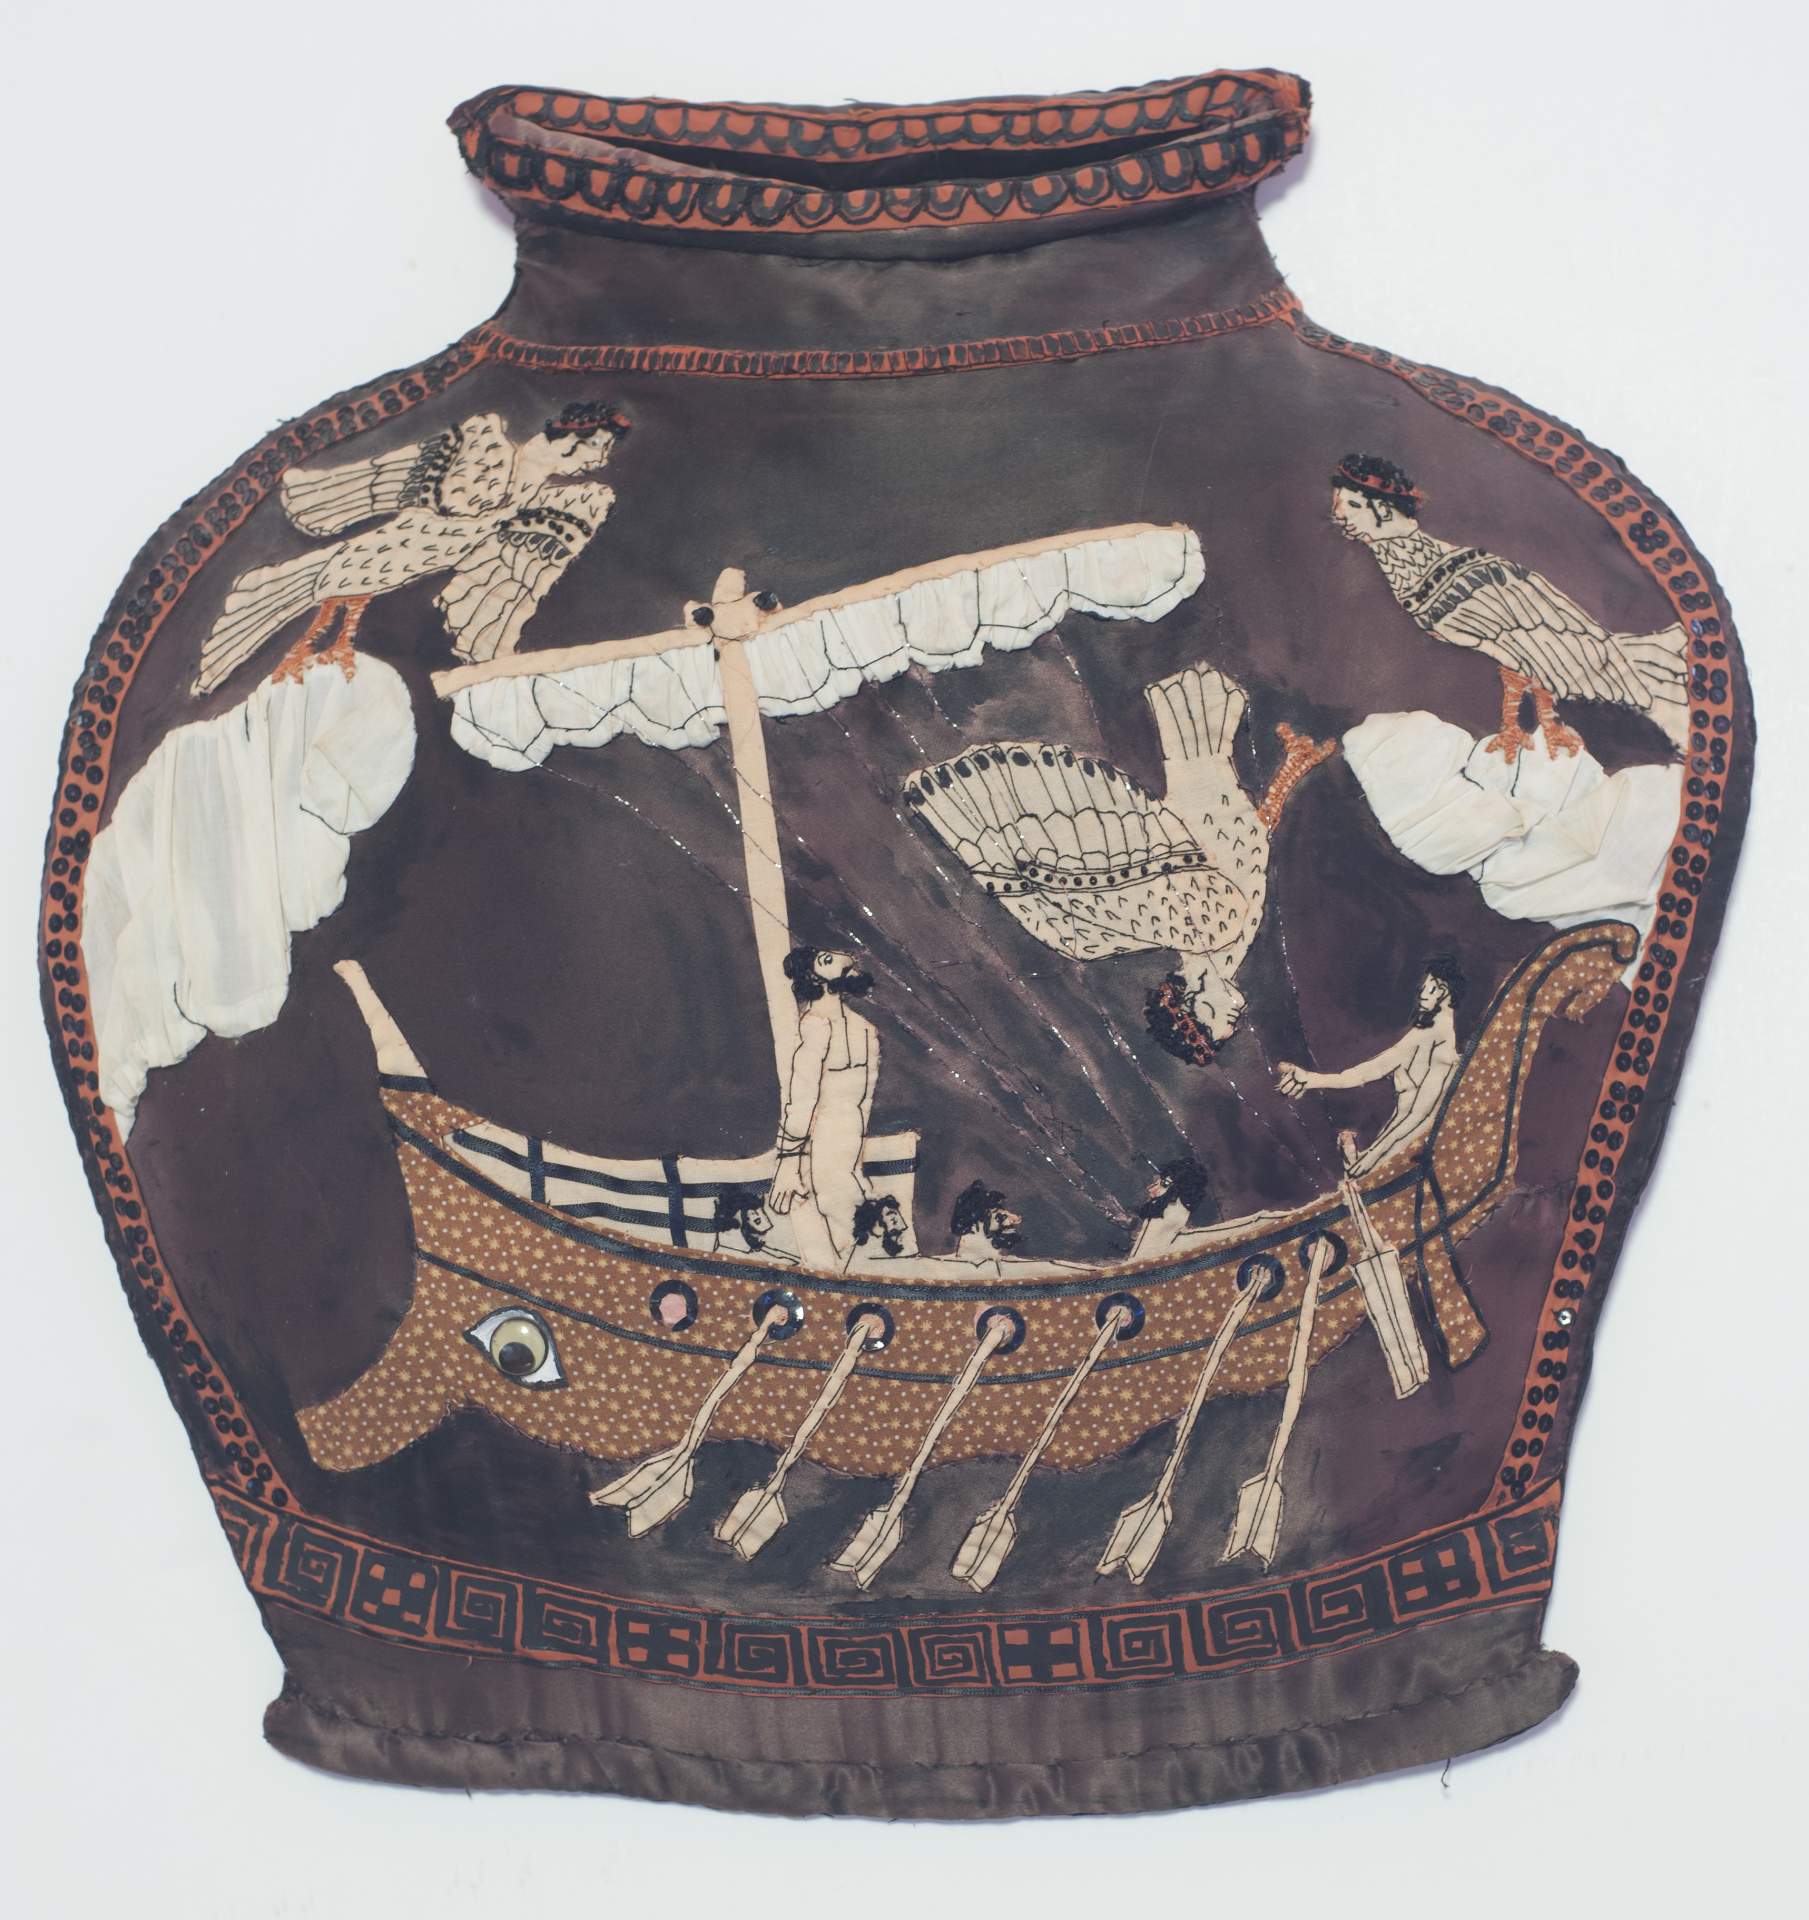 Odysseus Eludes the Sirens in a Calico Ship